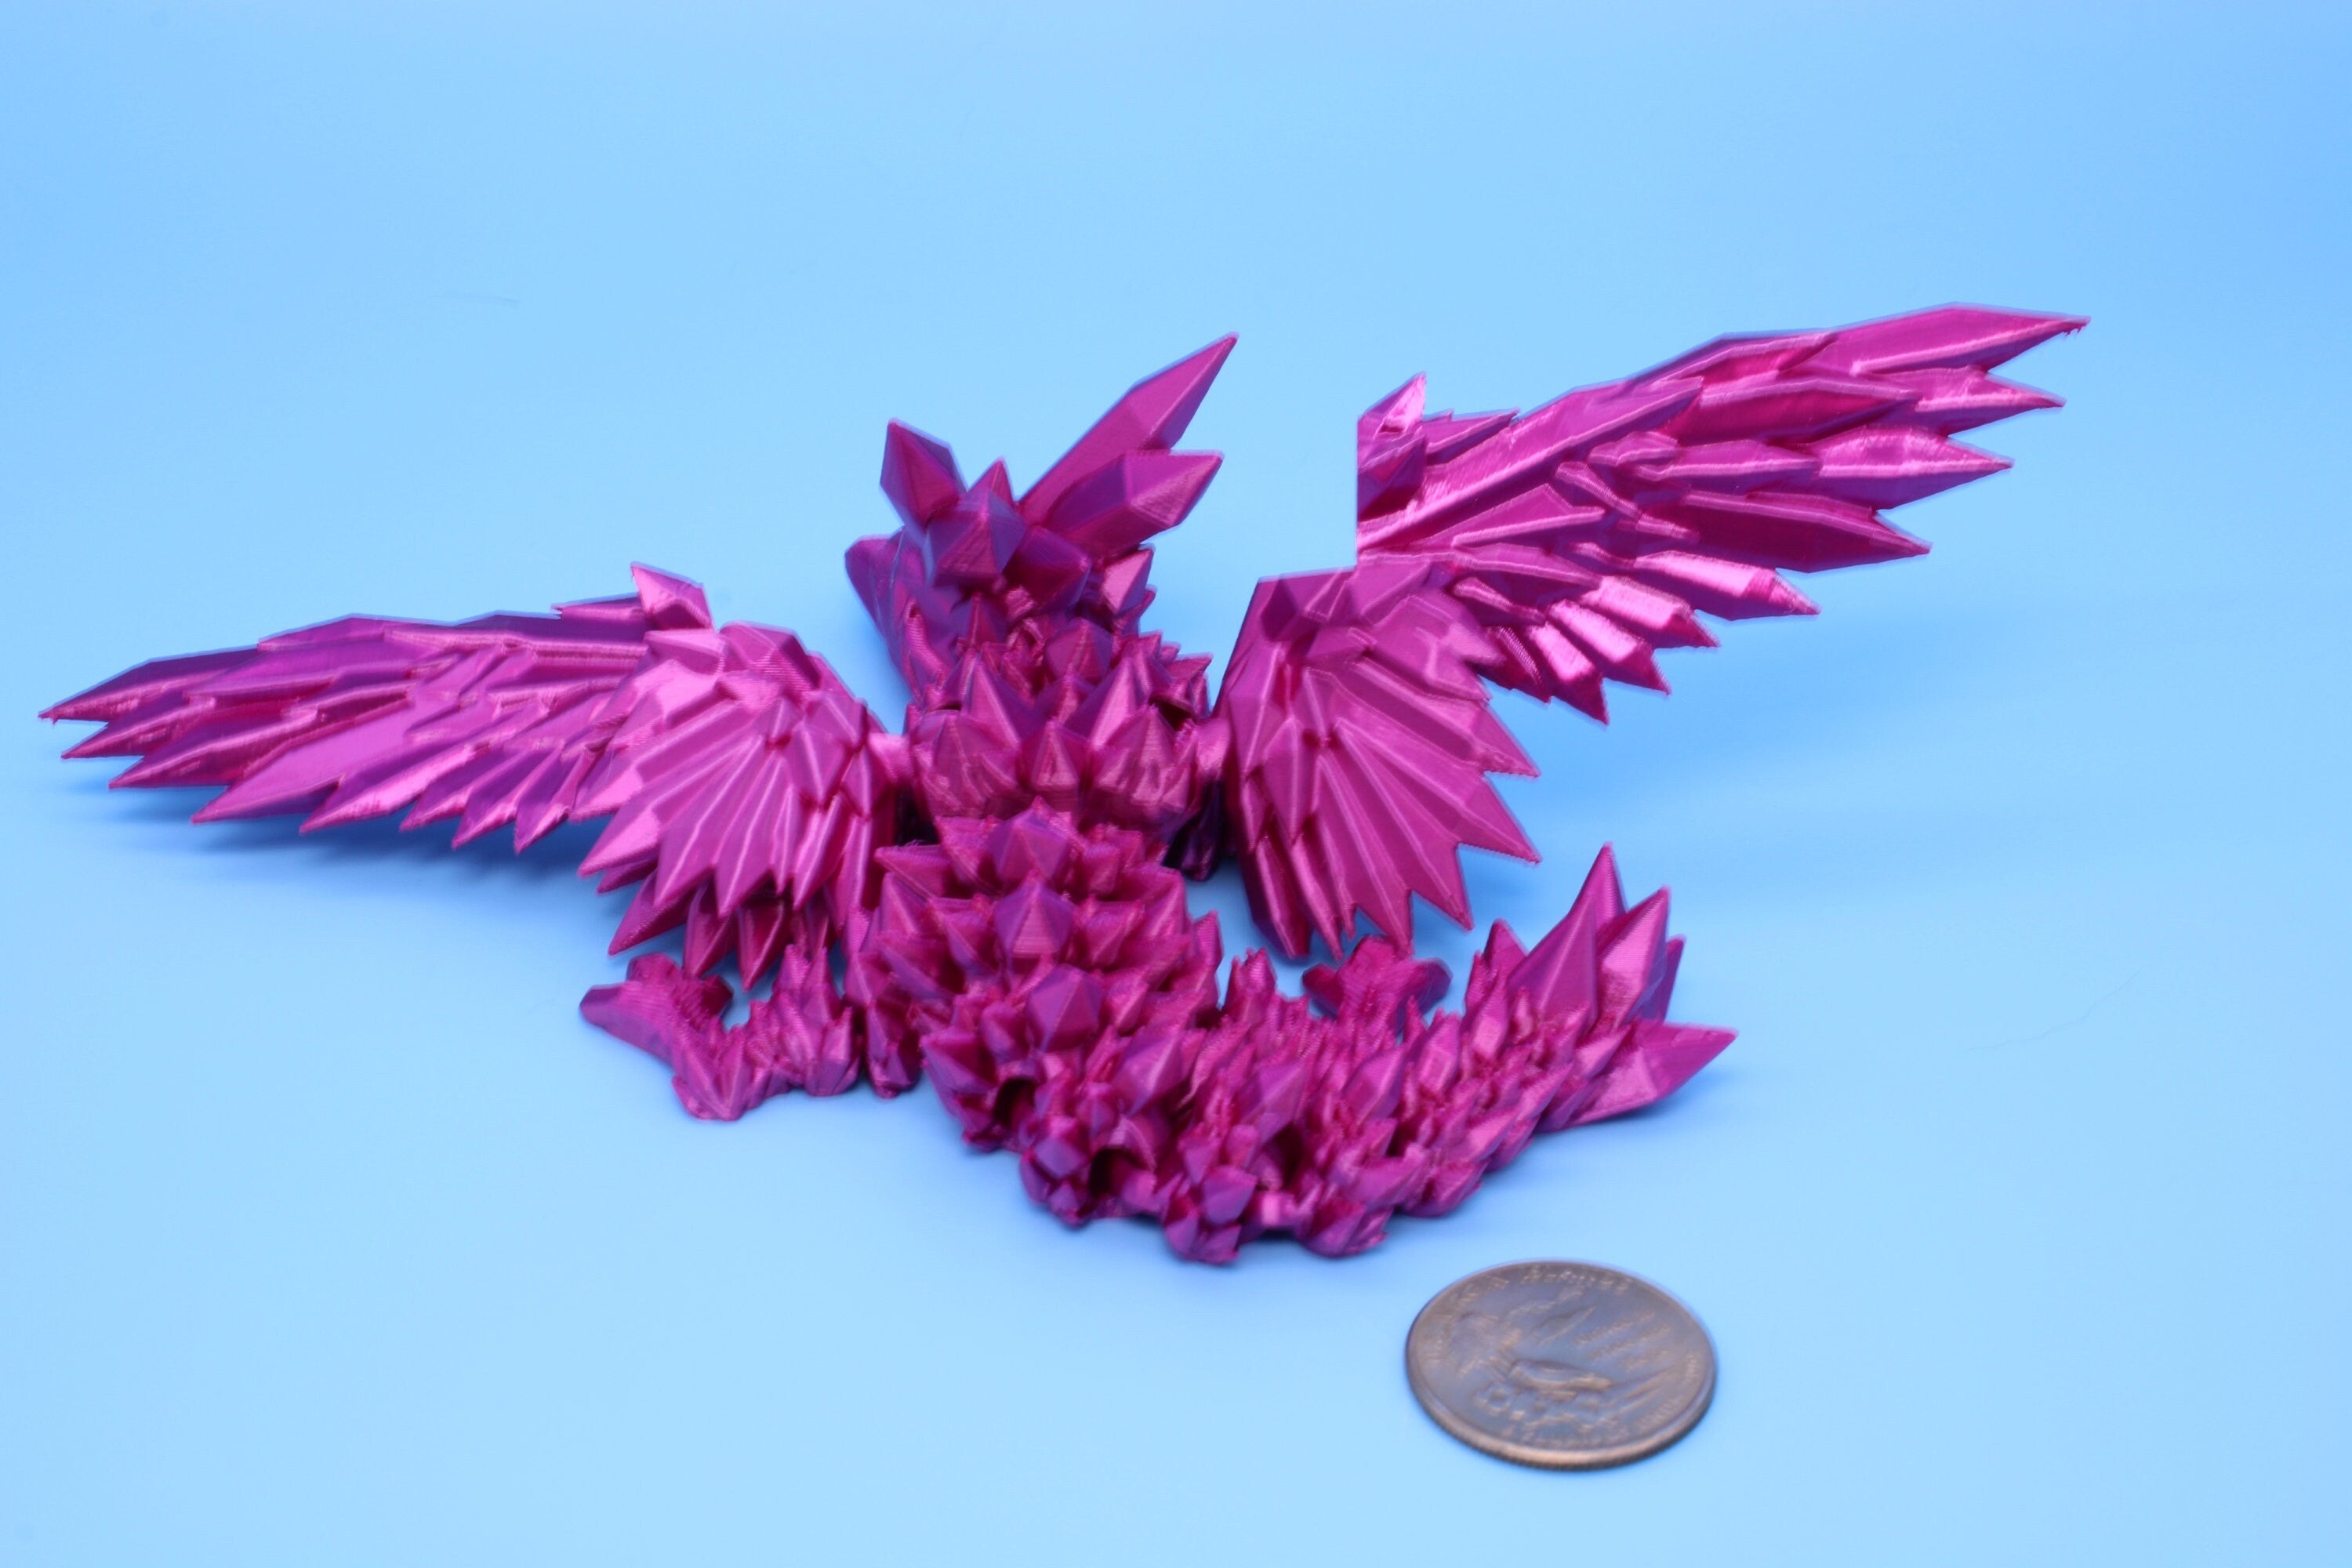 Baby Crystal Wing Dragon- Pink| Miniature | 3D printed | Dragon Fidget | Flexi Toy | 7 in. | Pet Dragon.